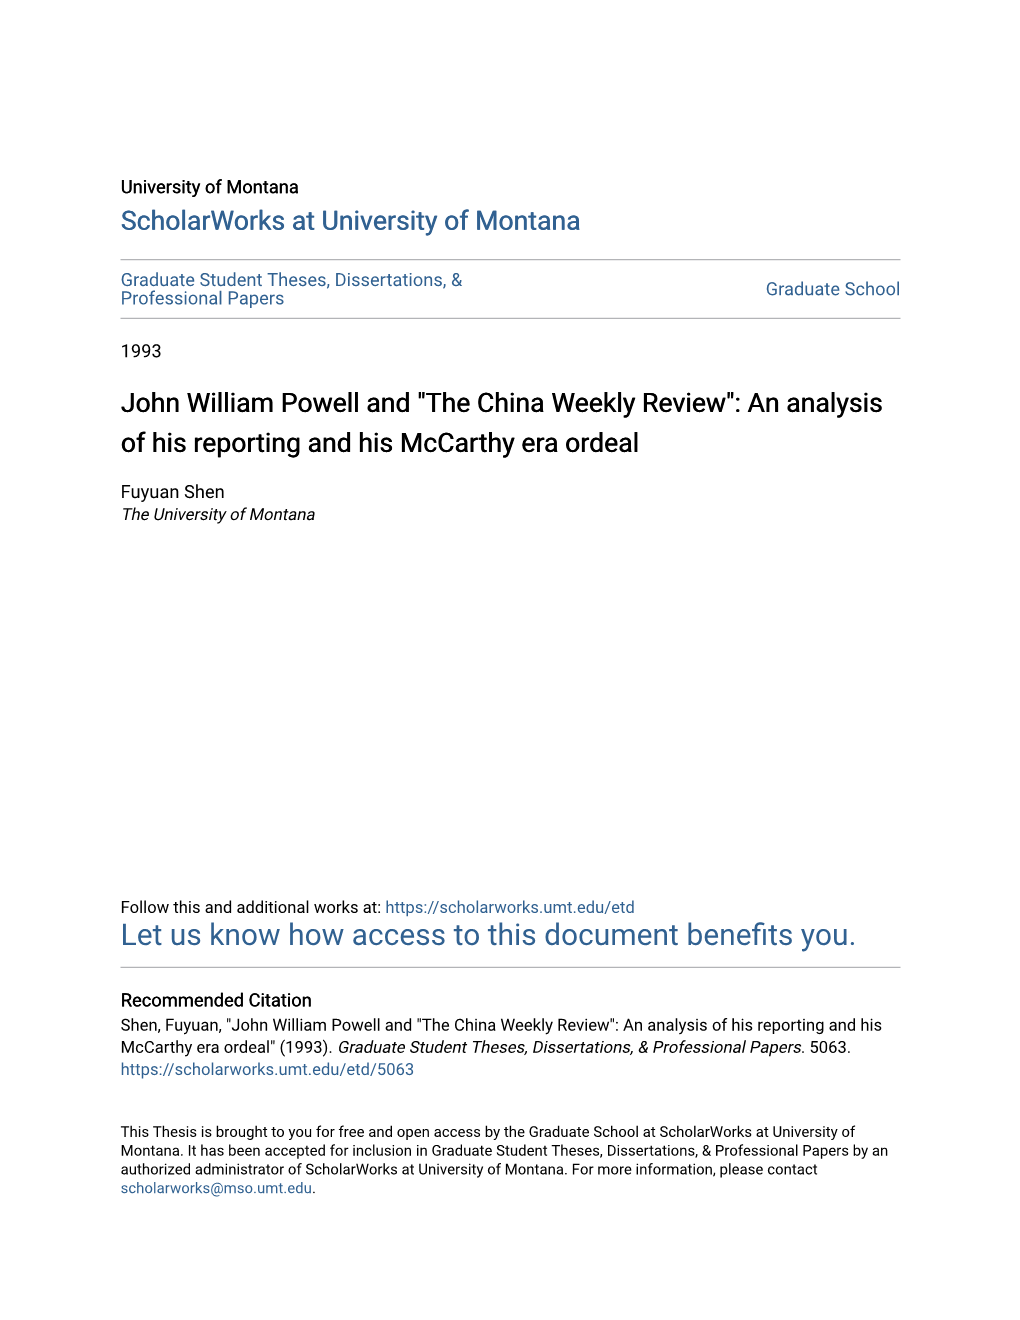 John William Powell and "The China Weekly Review": an Analysis of His Reporting and His Mccarthy Era Ordeal